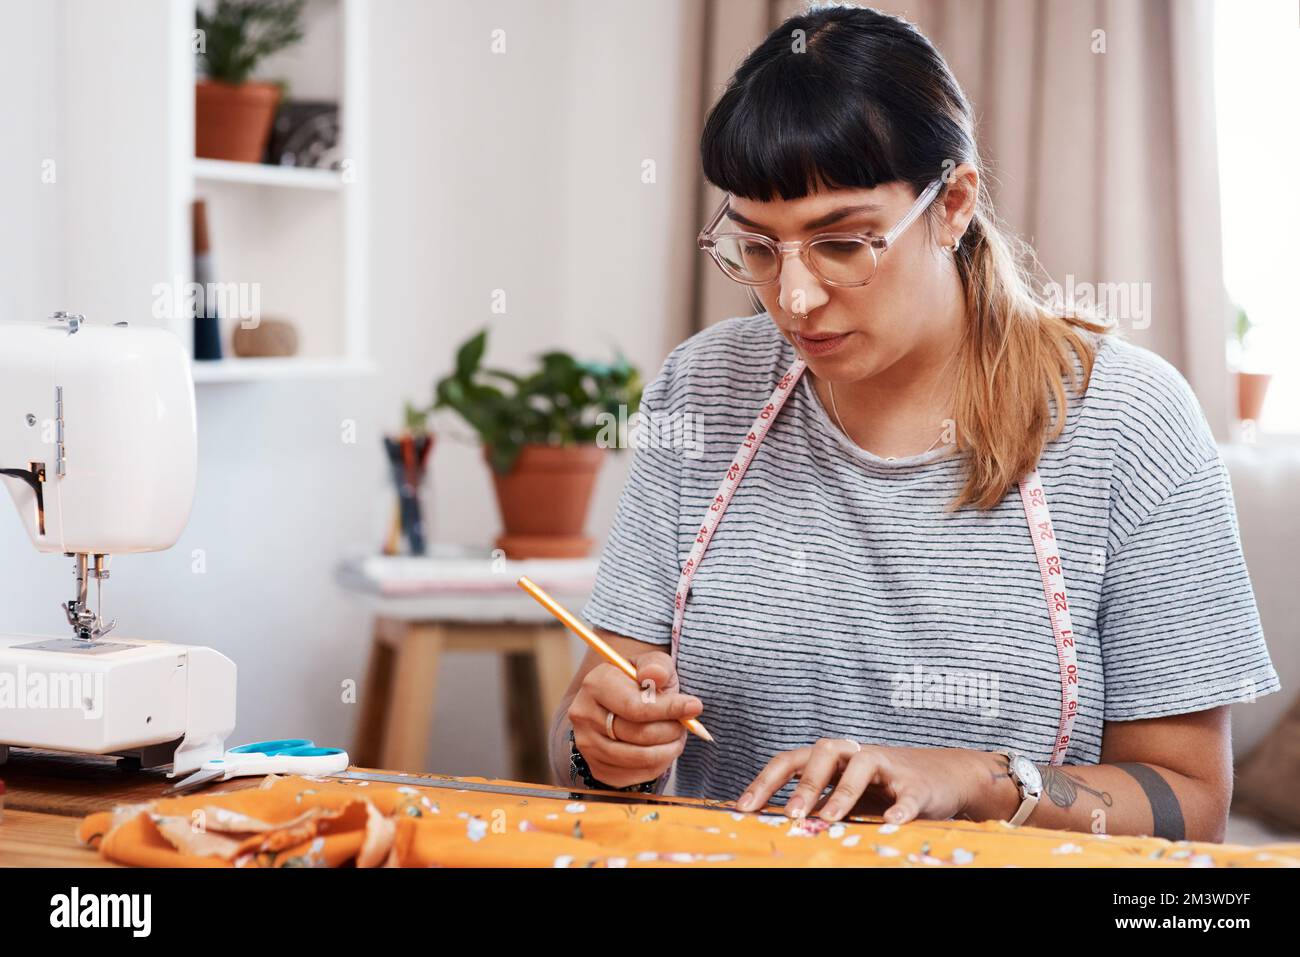 I have to measure this so itll be perfect for sewing. a young woman designing a garment at home. Stock Photo